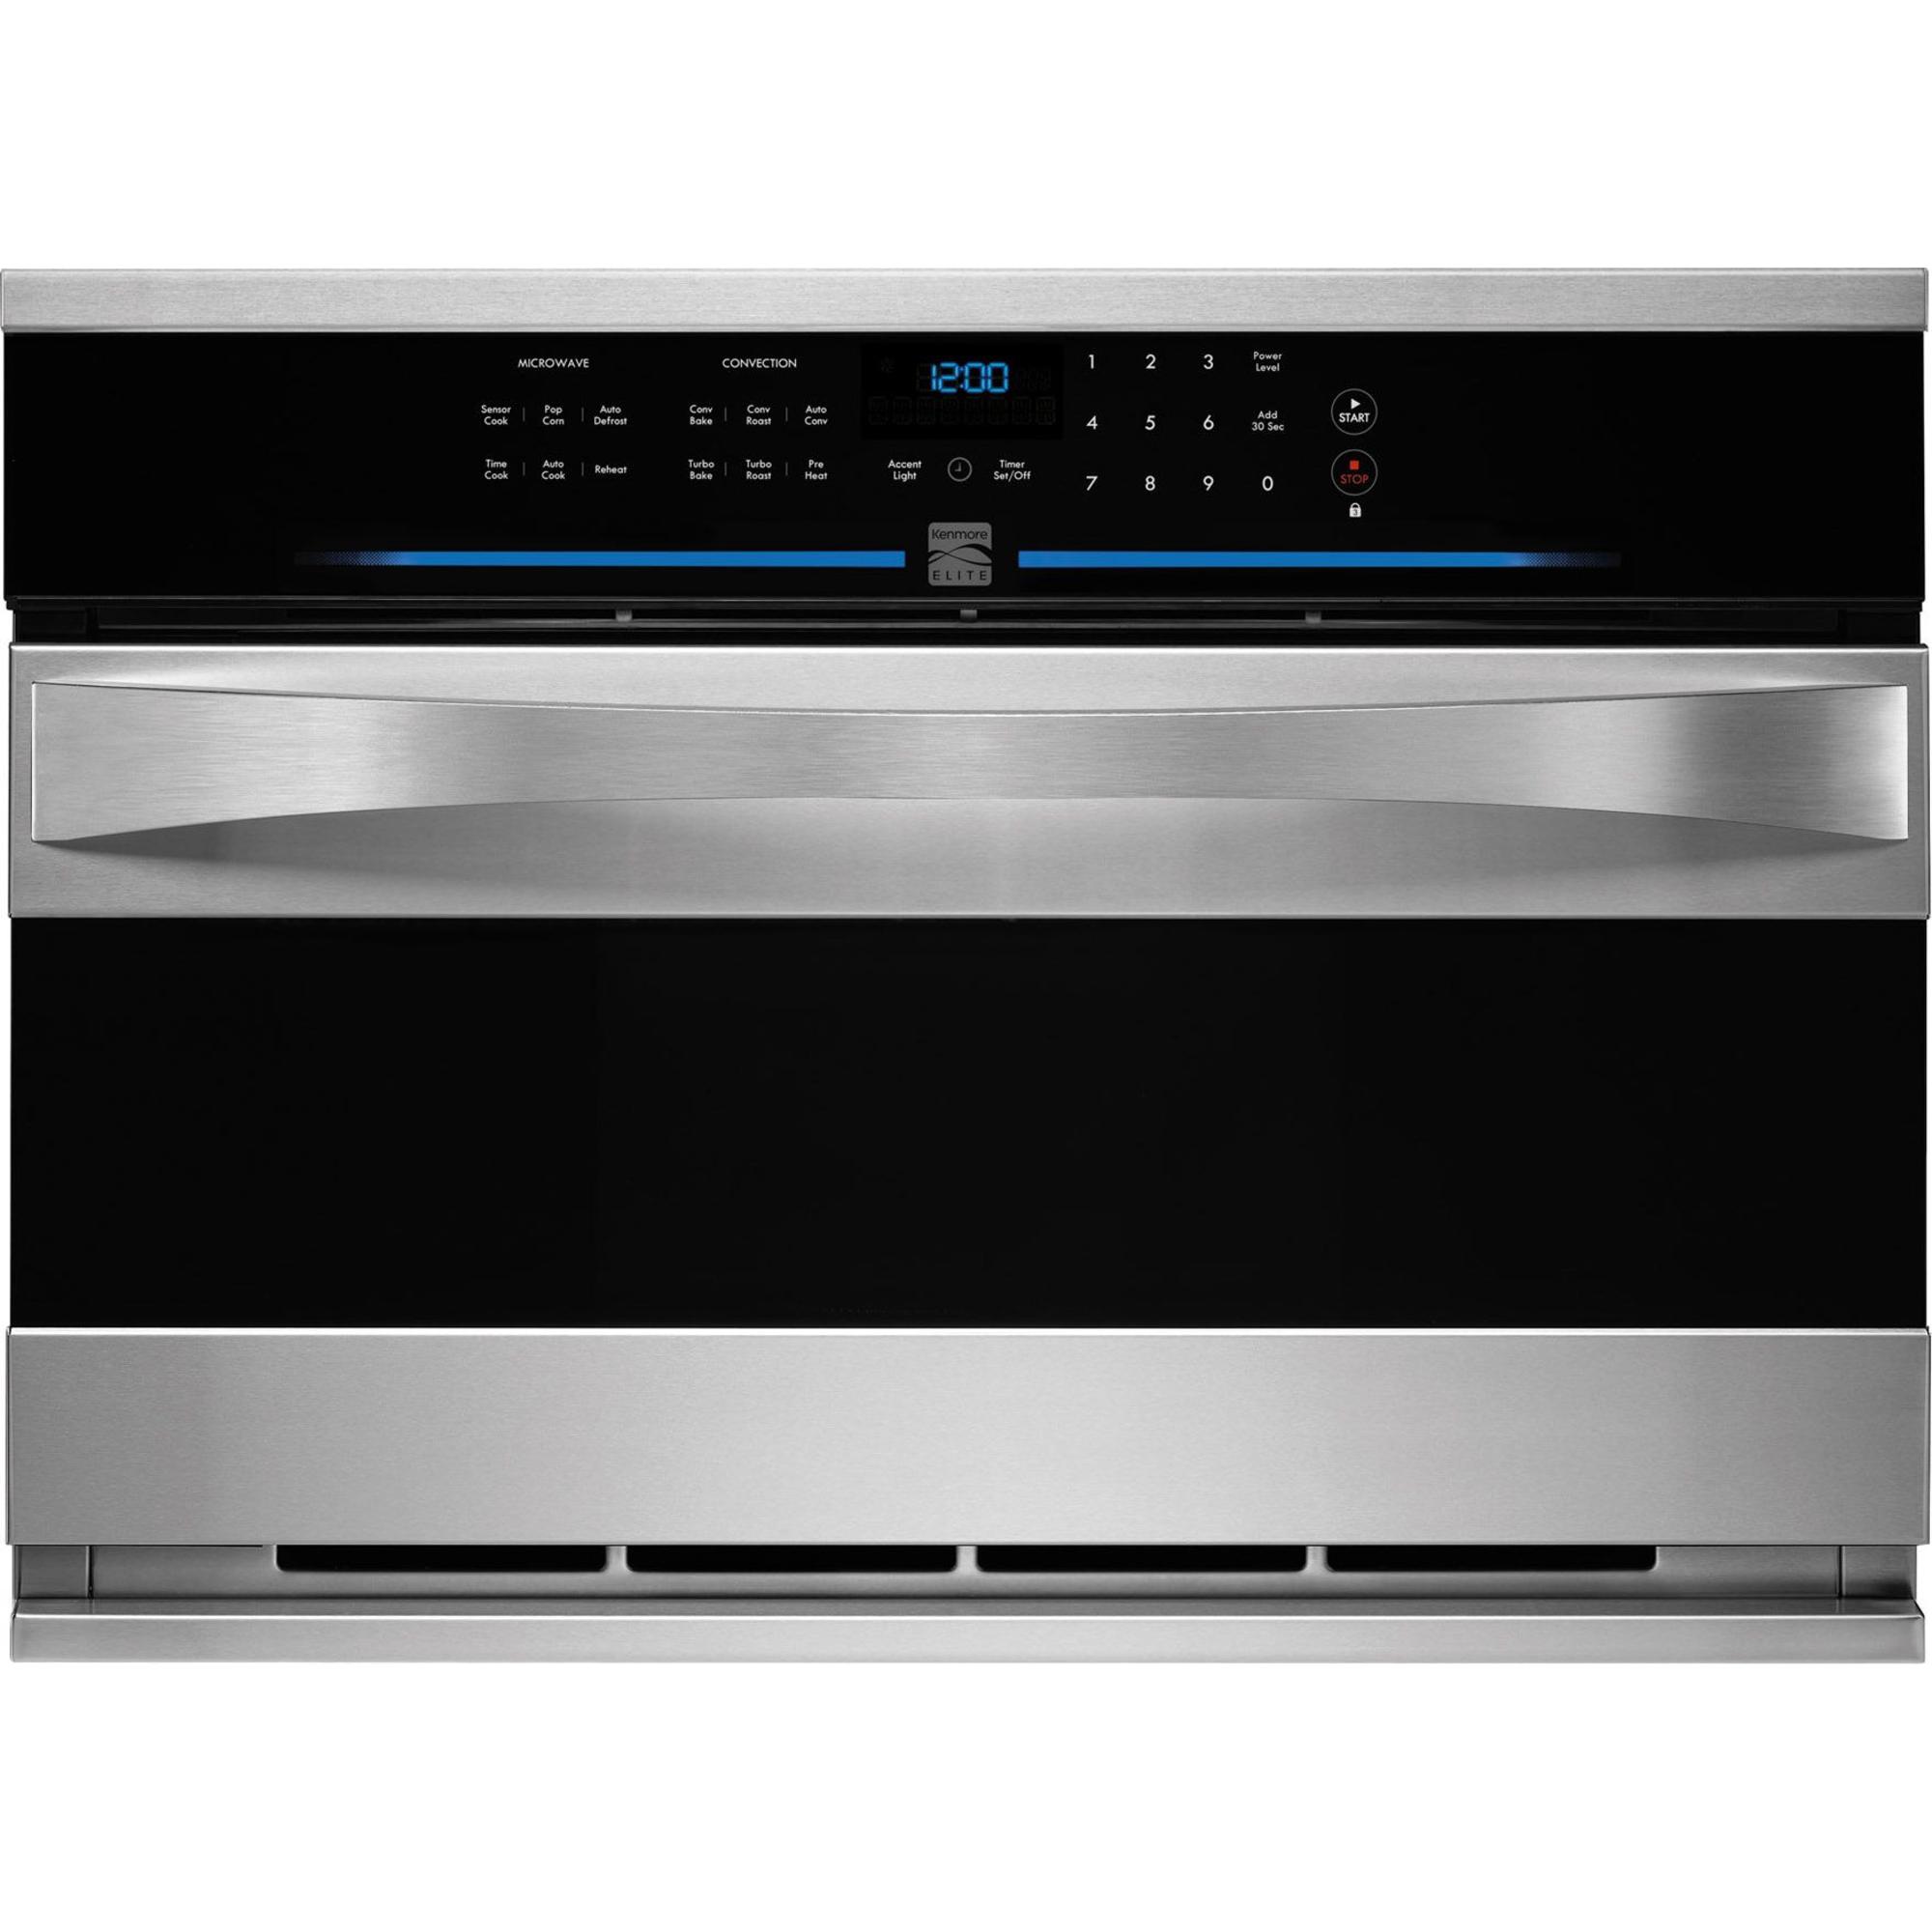 Kenmore Elite 48883 30" Built-in Convection Microwave